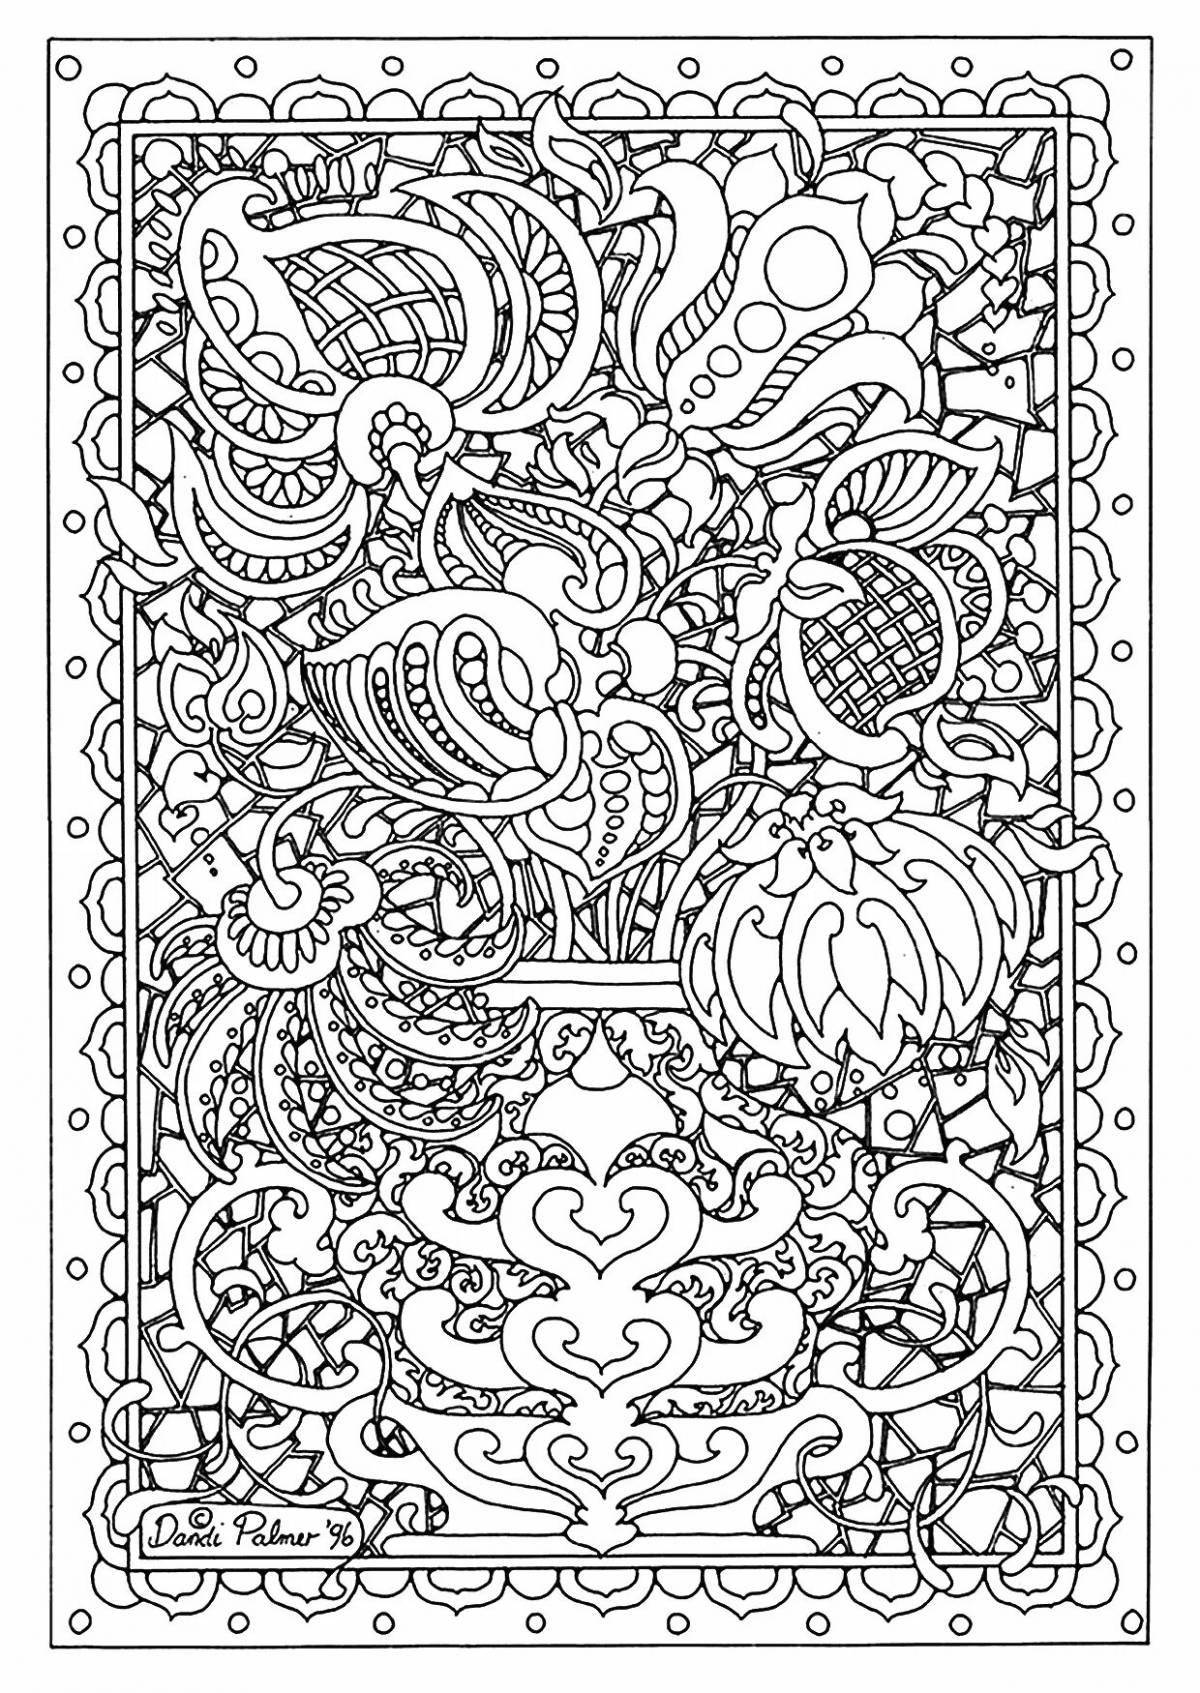 Intricate coloring pages intricate patterns for girls